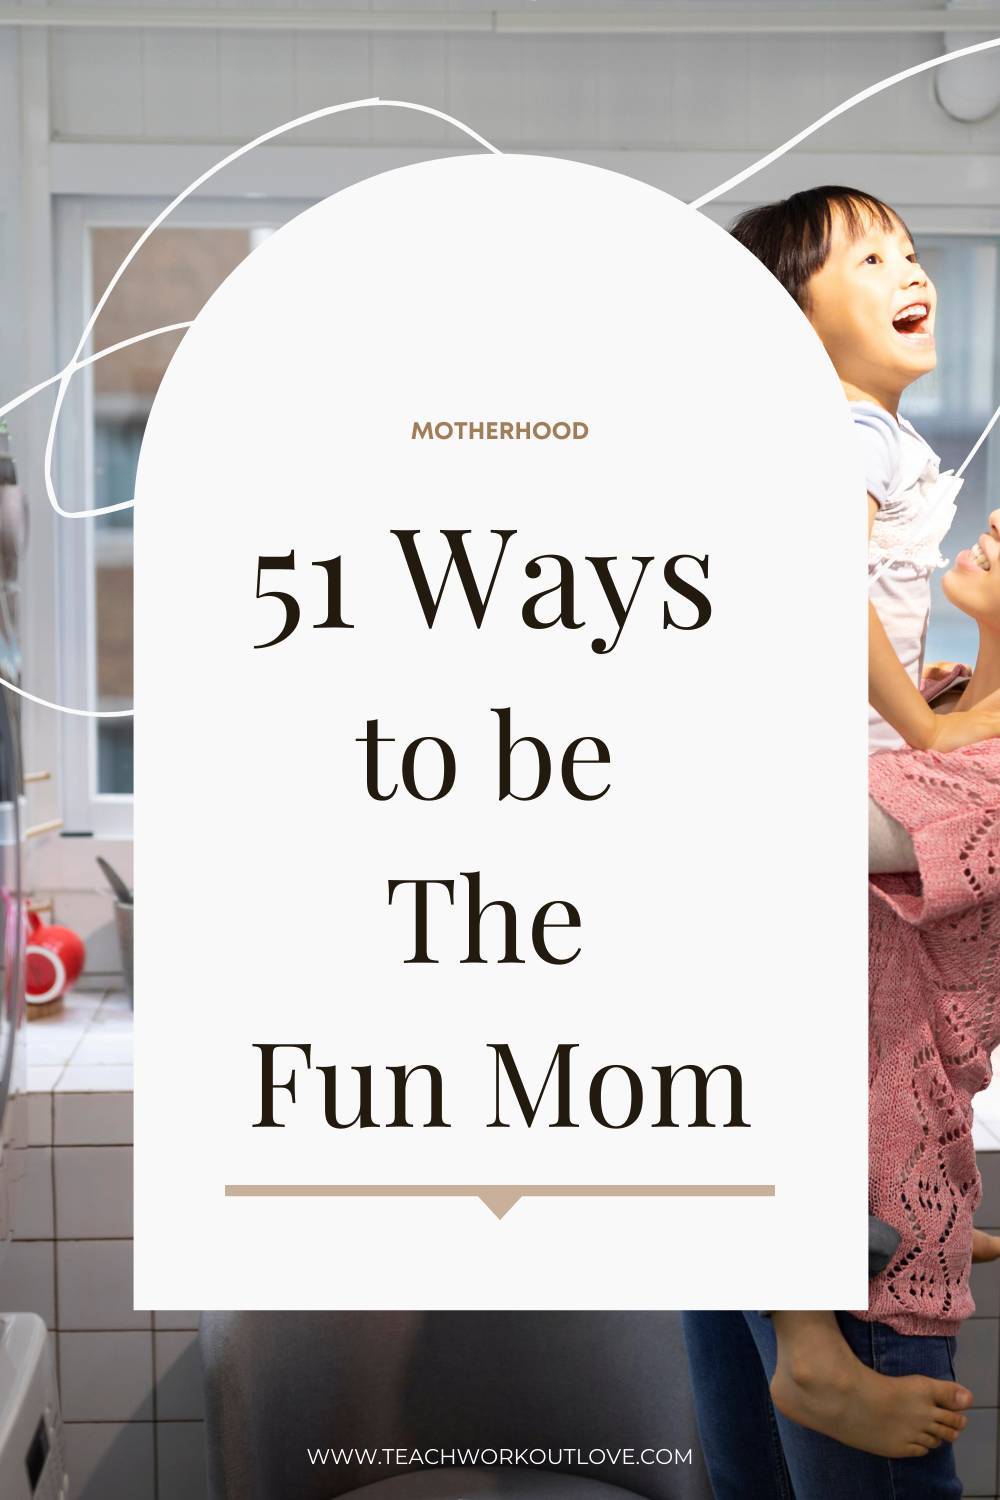 Being a mom is a big responsibility & often it becomes quite challenging. But how can you be as cool as dad? Here's 51 ways to be a fun mom!